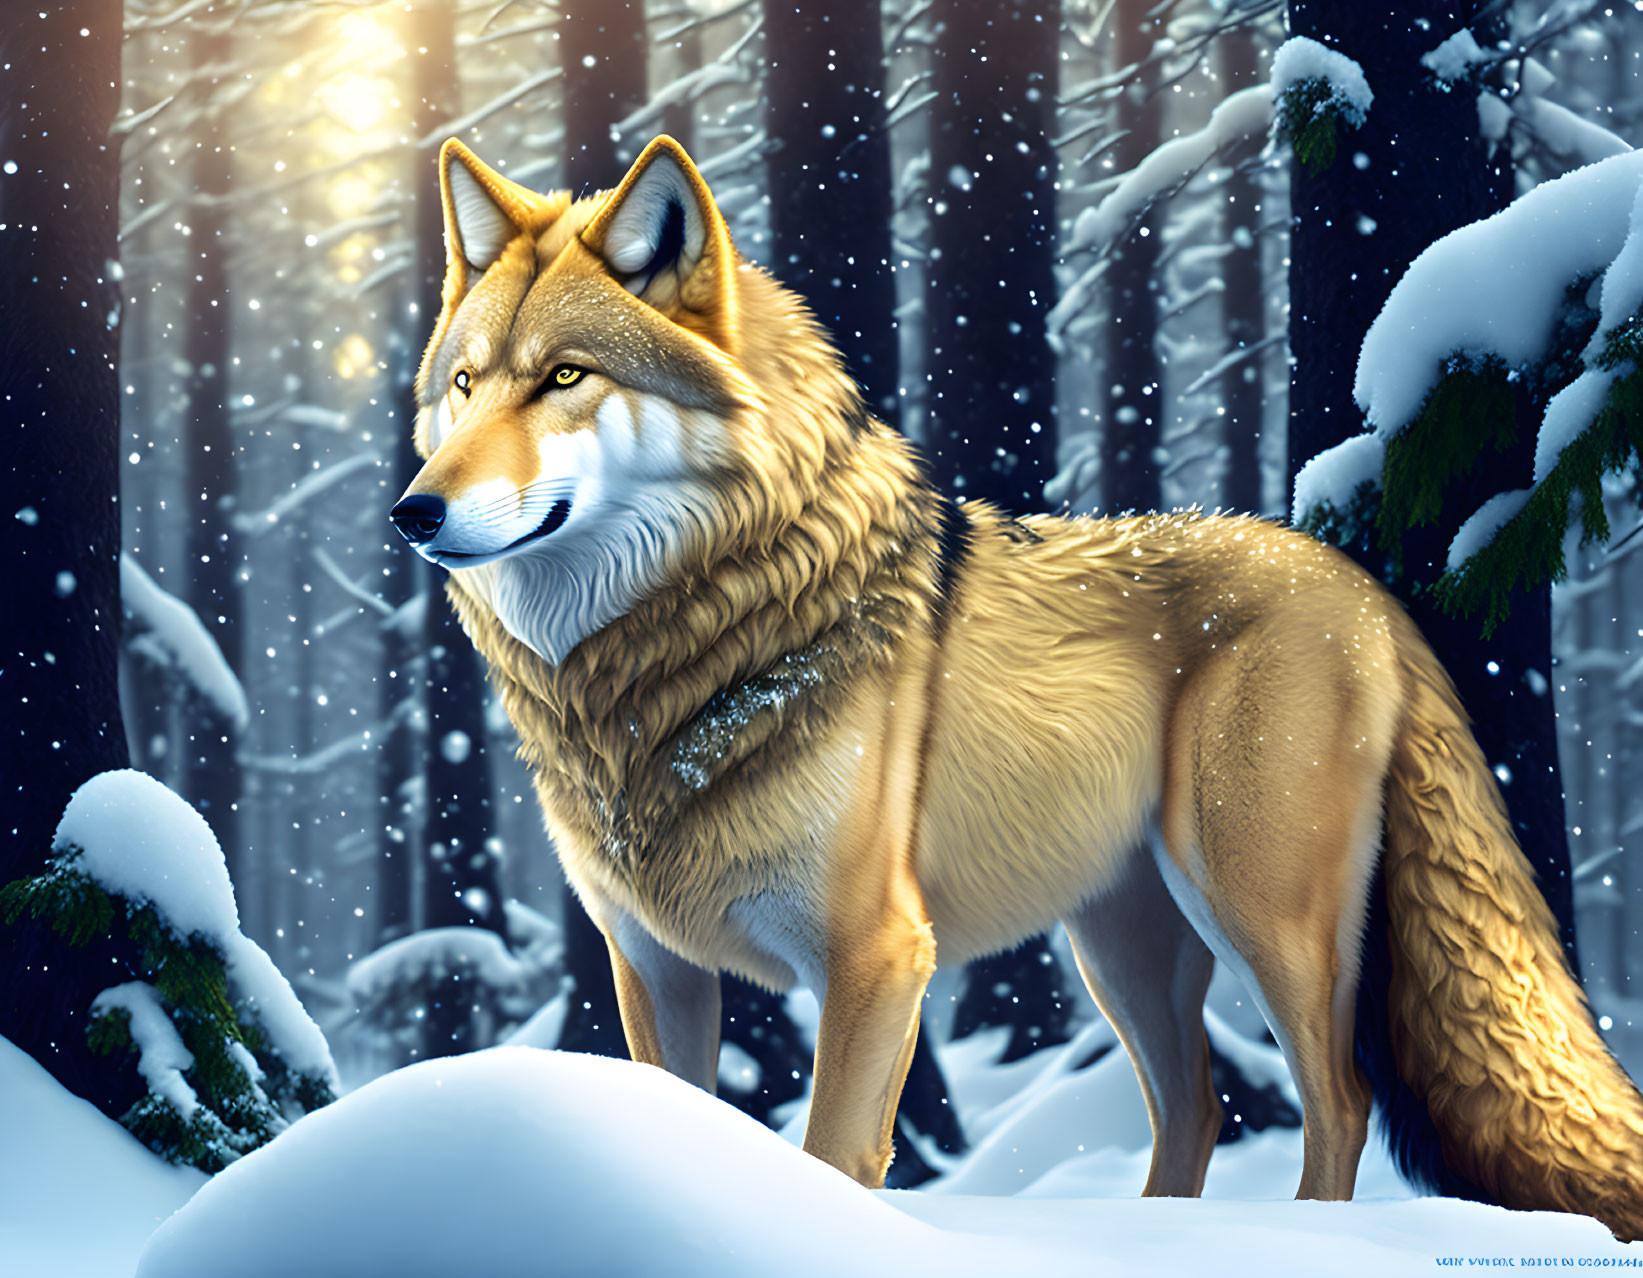 Majestic wolf in snowy forest with sunlight and falling snowflakes